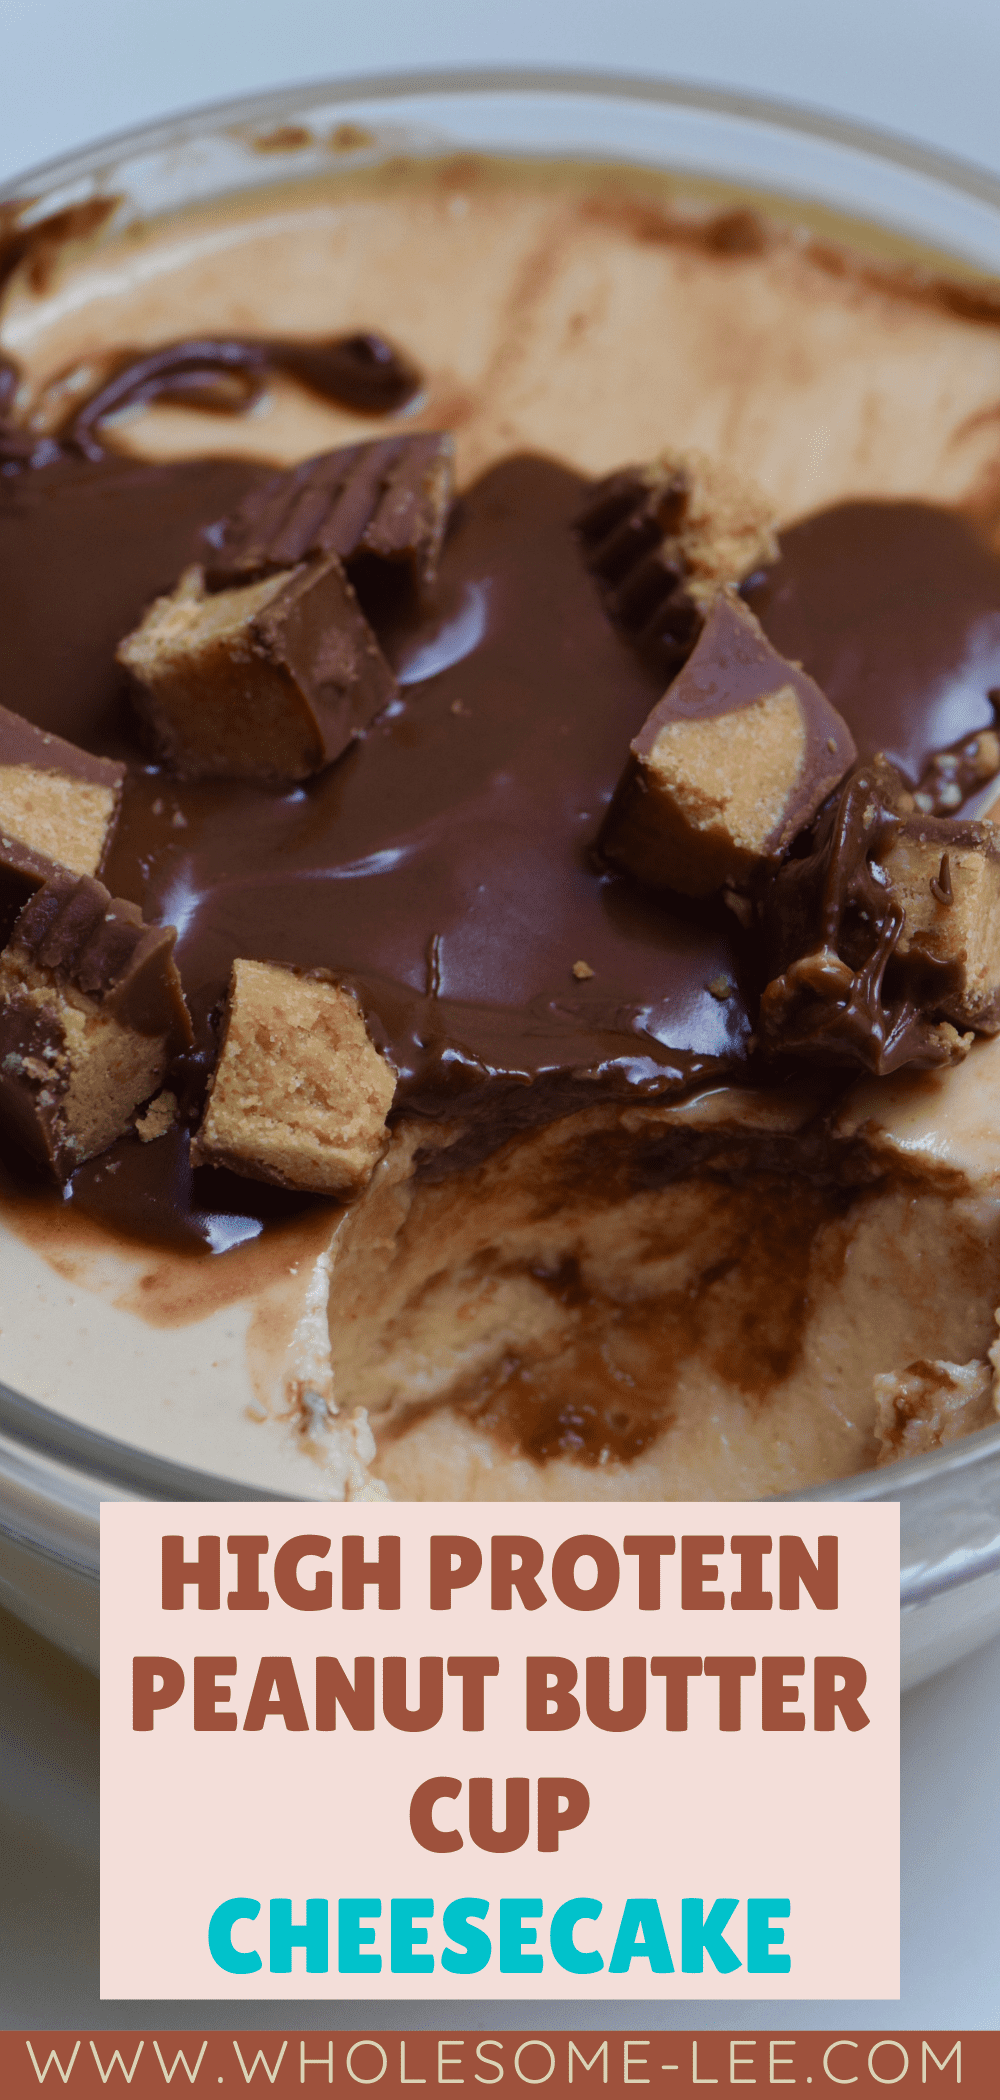 High protein peanut butter cup breakfast cheesecake